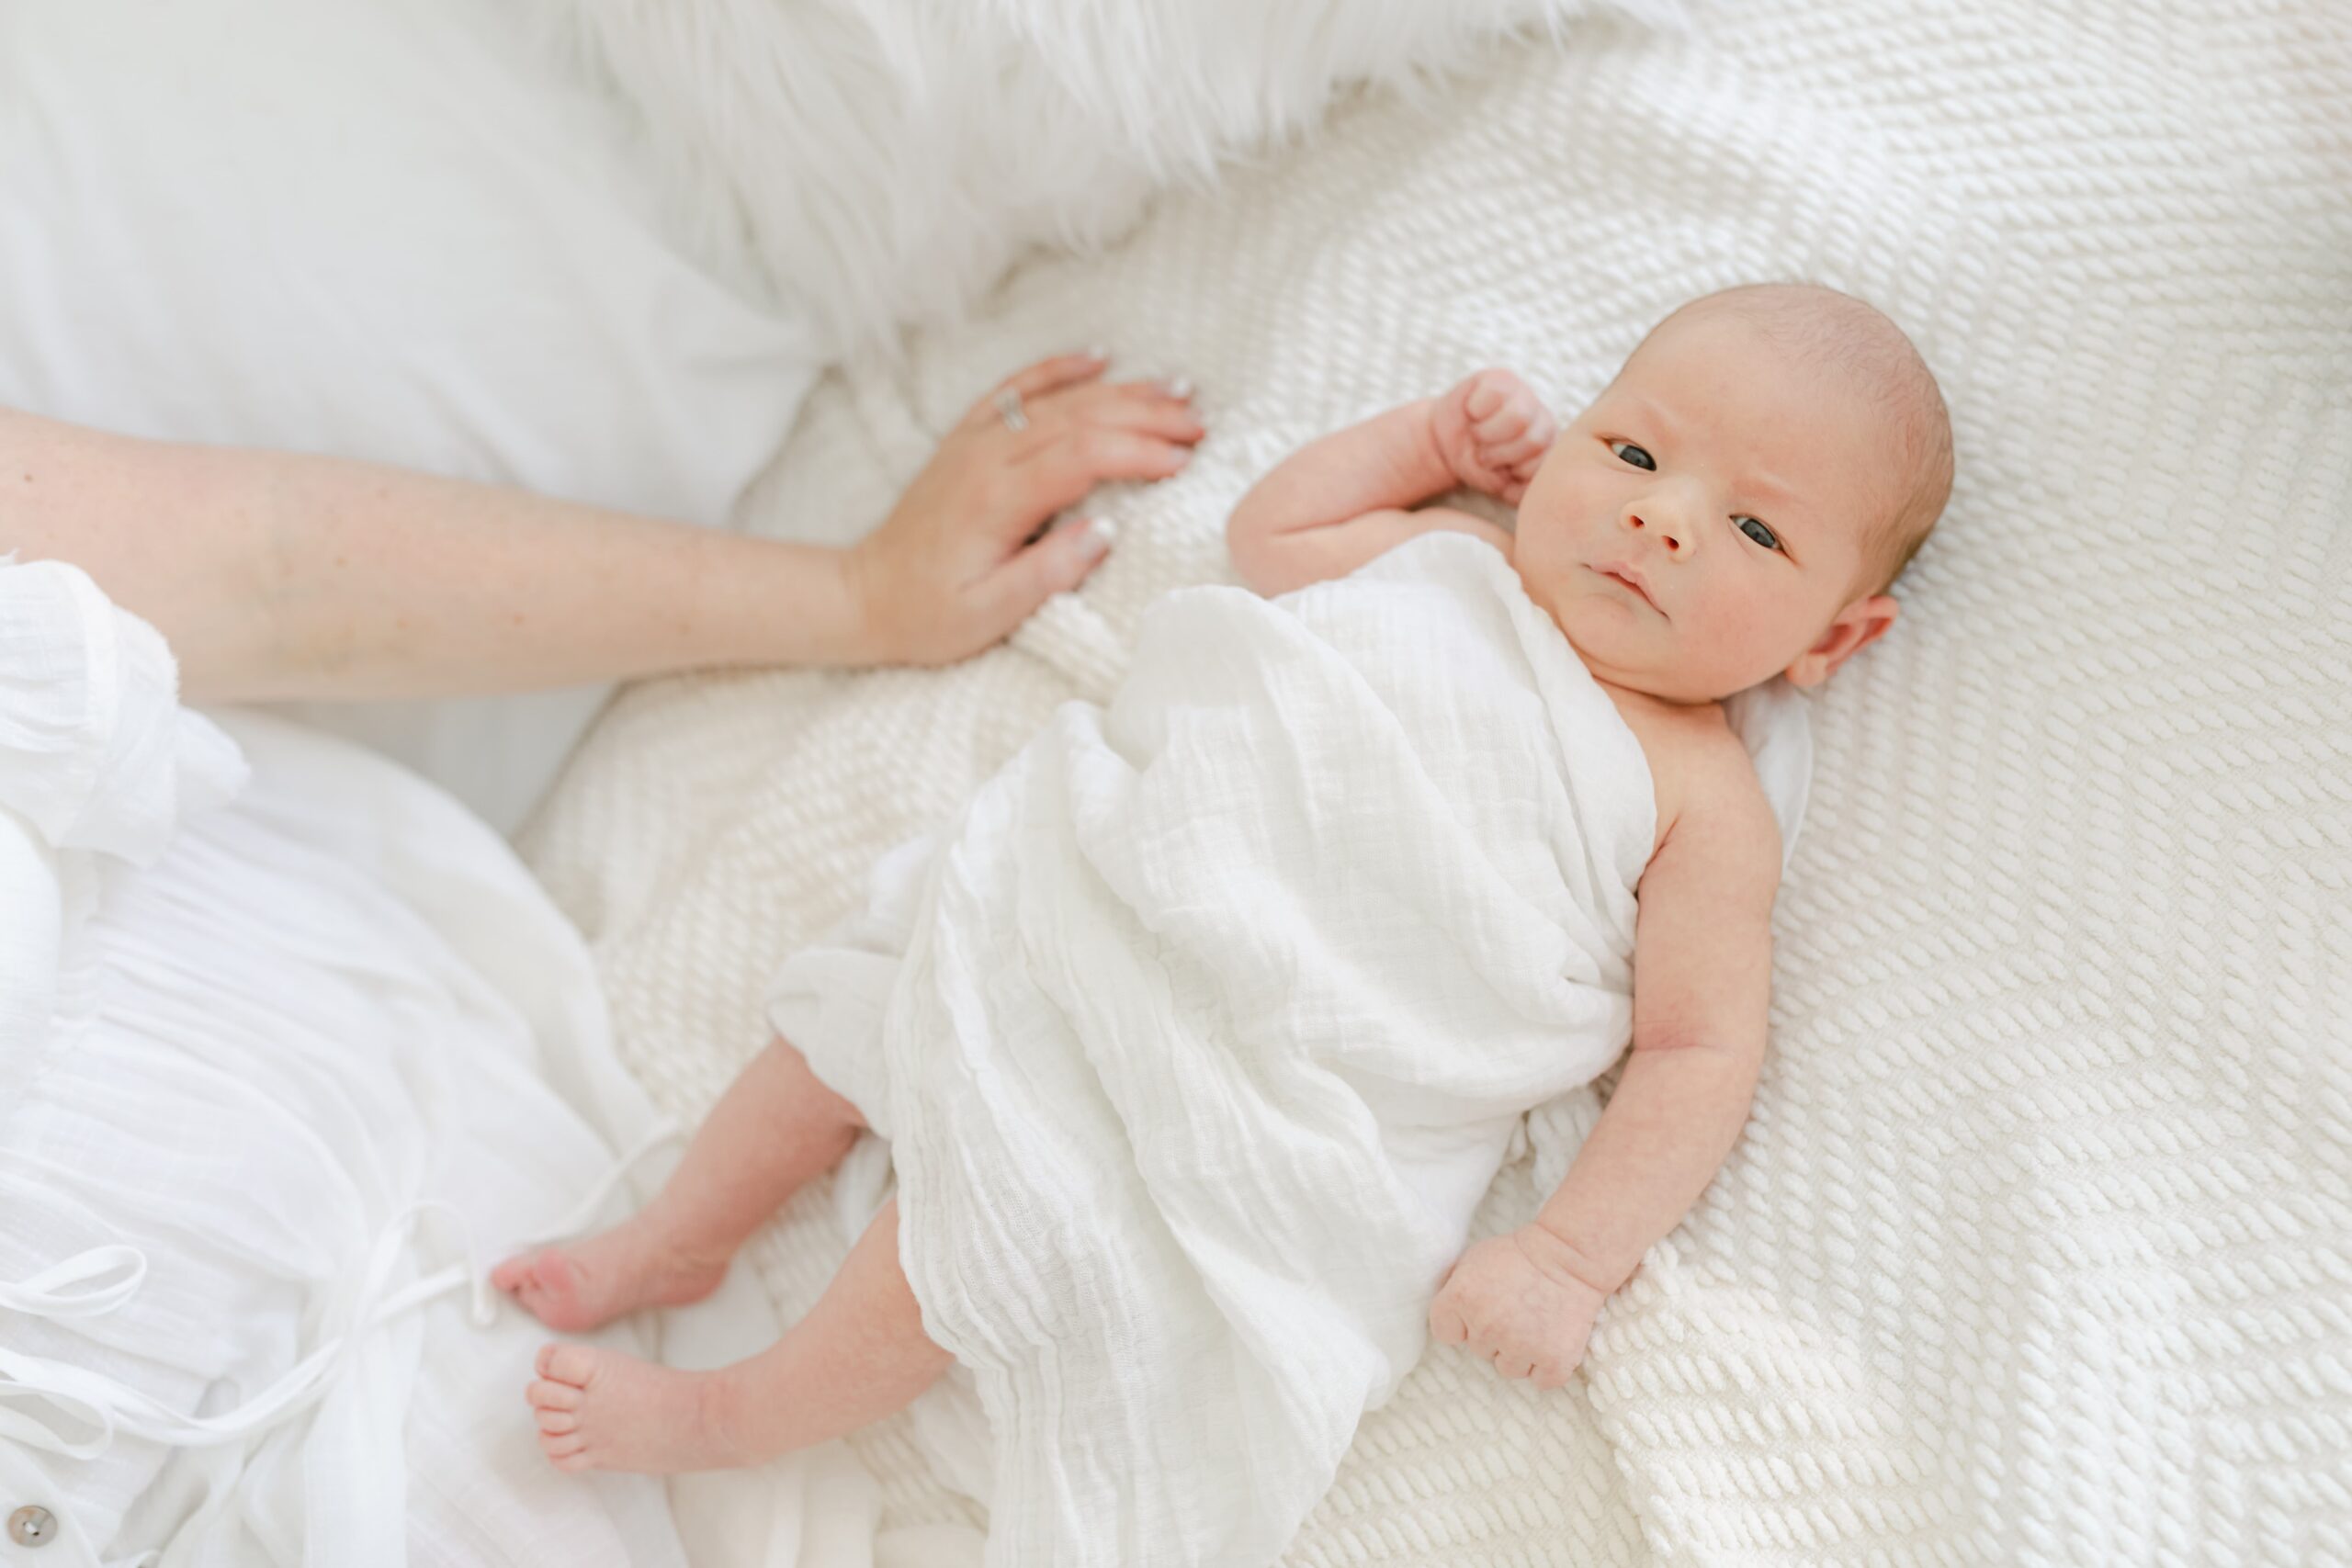 A newborn baby lays on a white bed wrapped in a white cloth with eyes open